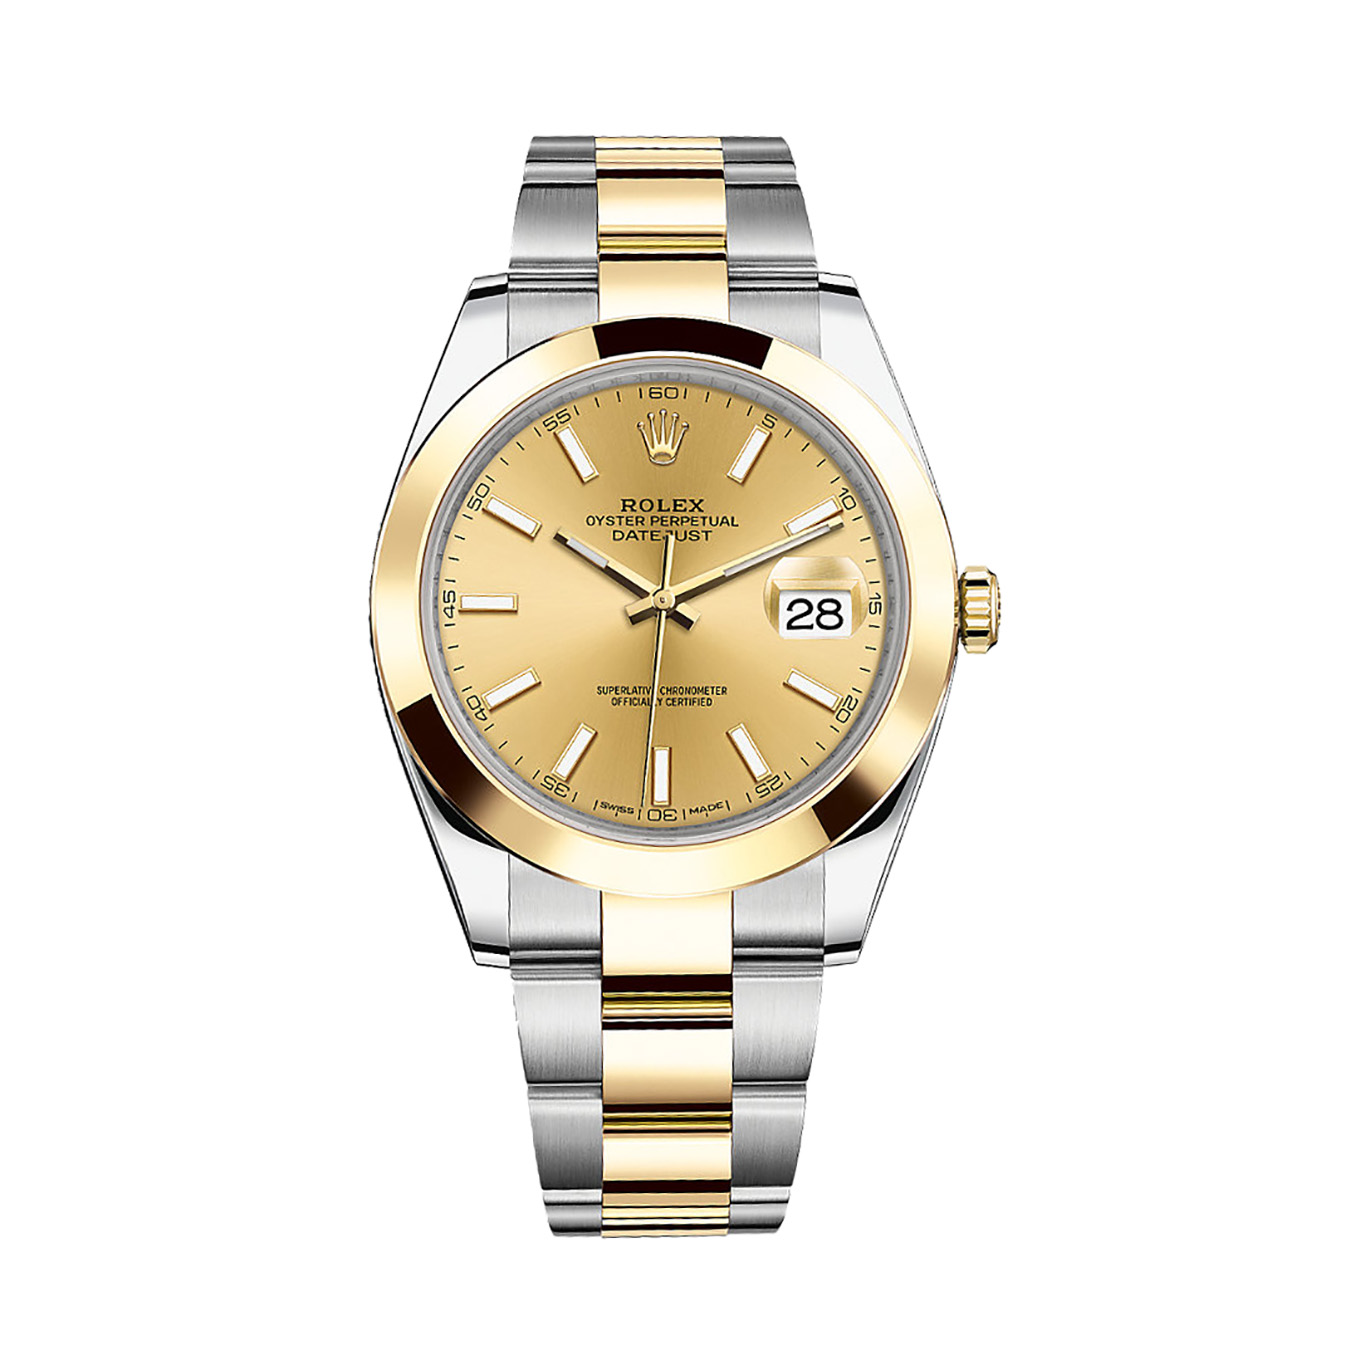 Datejust 41 126303 Gold & Stainless Steel Watch (Champagne)